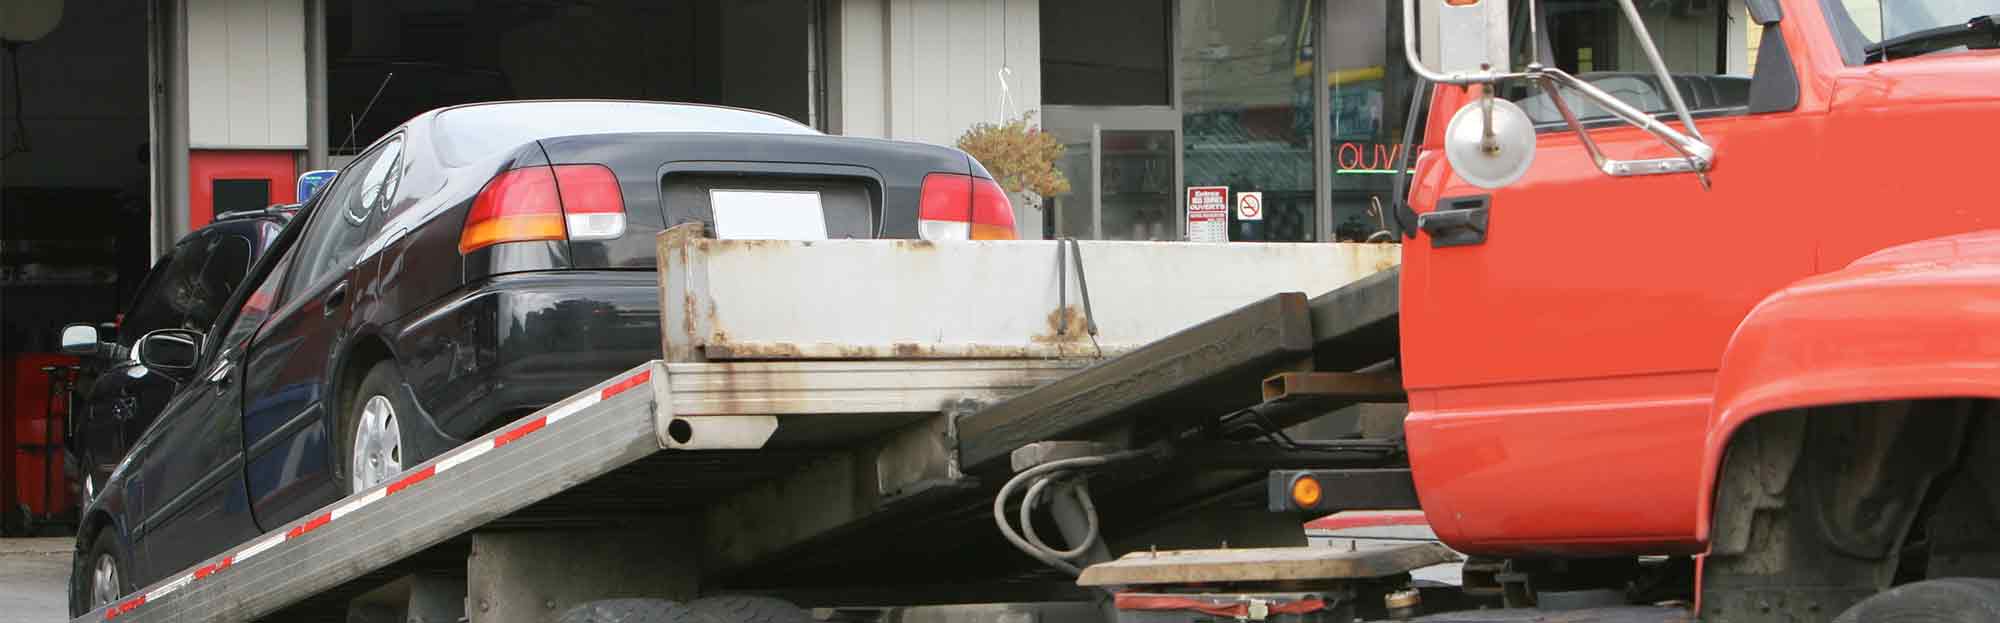 Tow truck delivers car to repair shop.